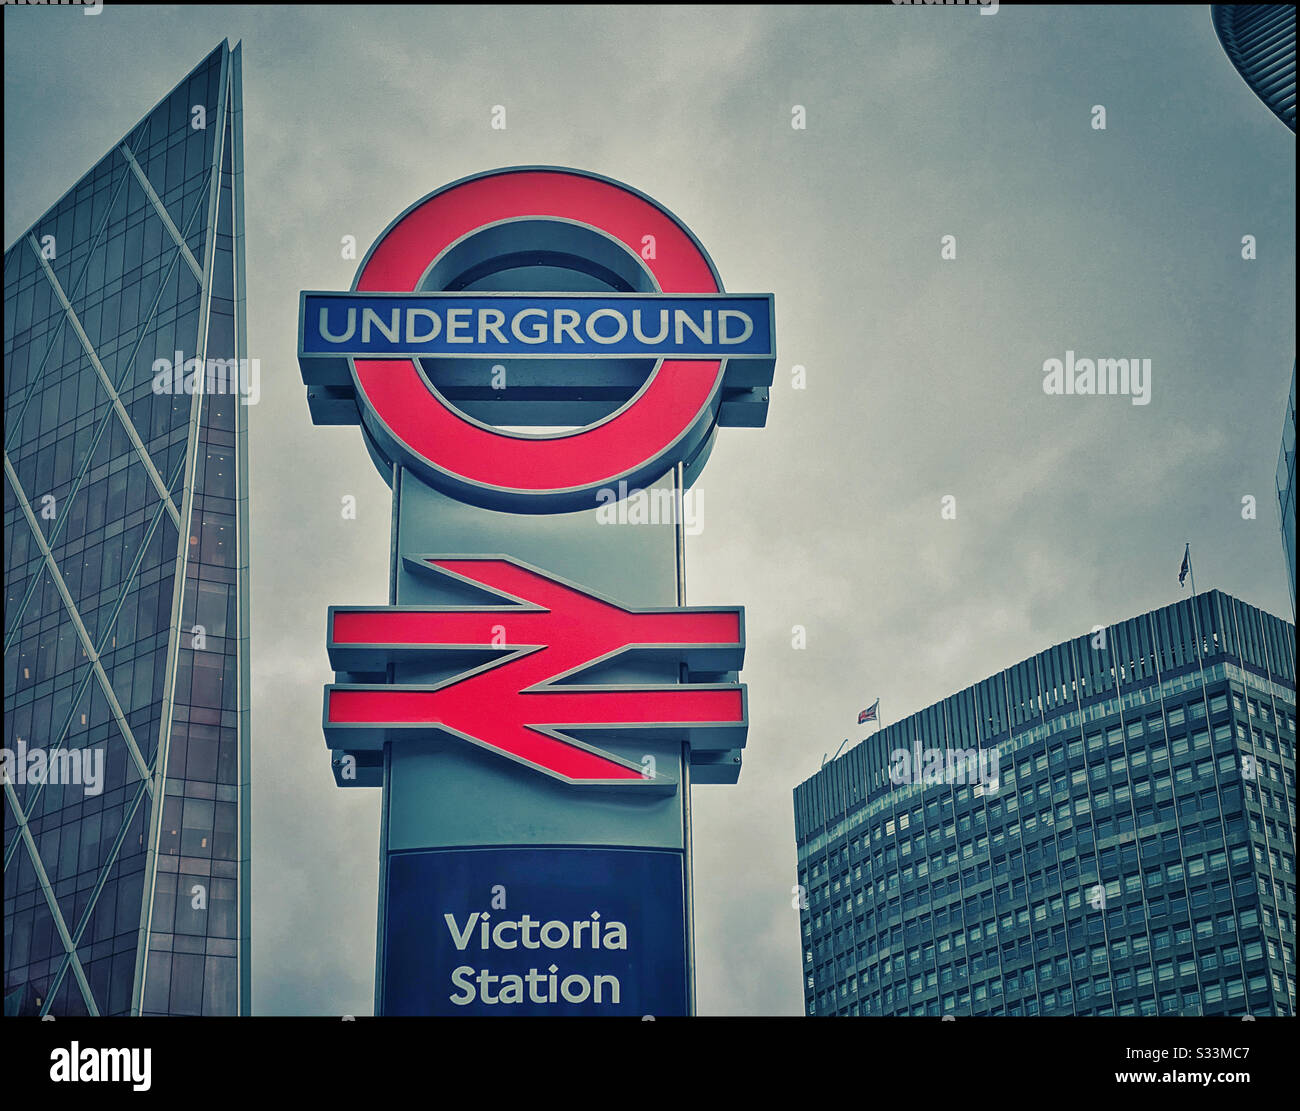 The iconic and famous British Rail and London Underground signs at Victoria Station. The meeting point of the Circle, District & Victoria Lines. Photo Credit - © COLIN HOSKINS. Stock Photo